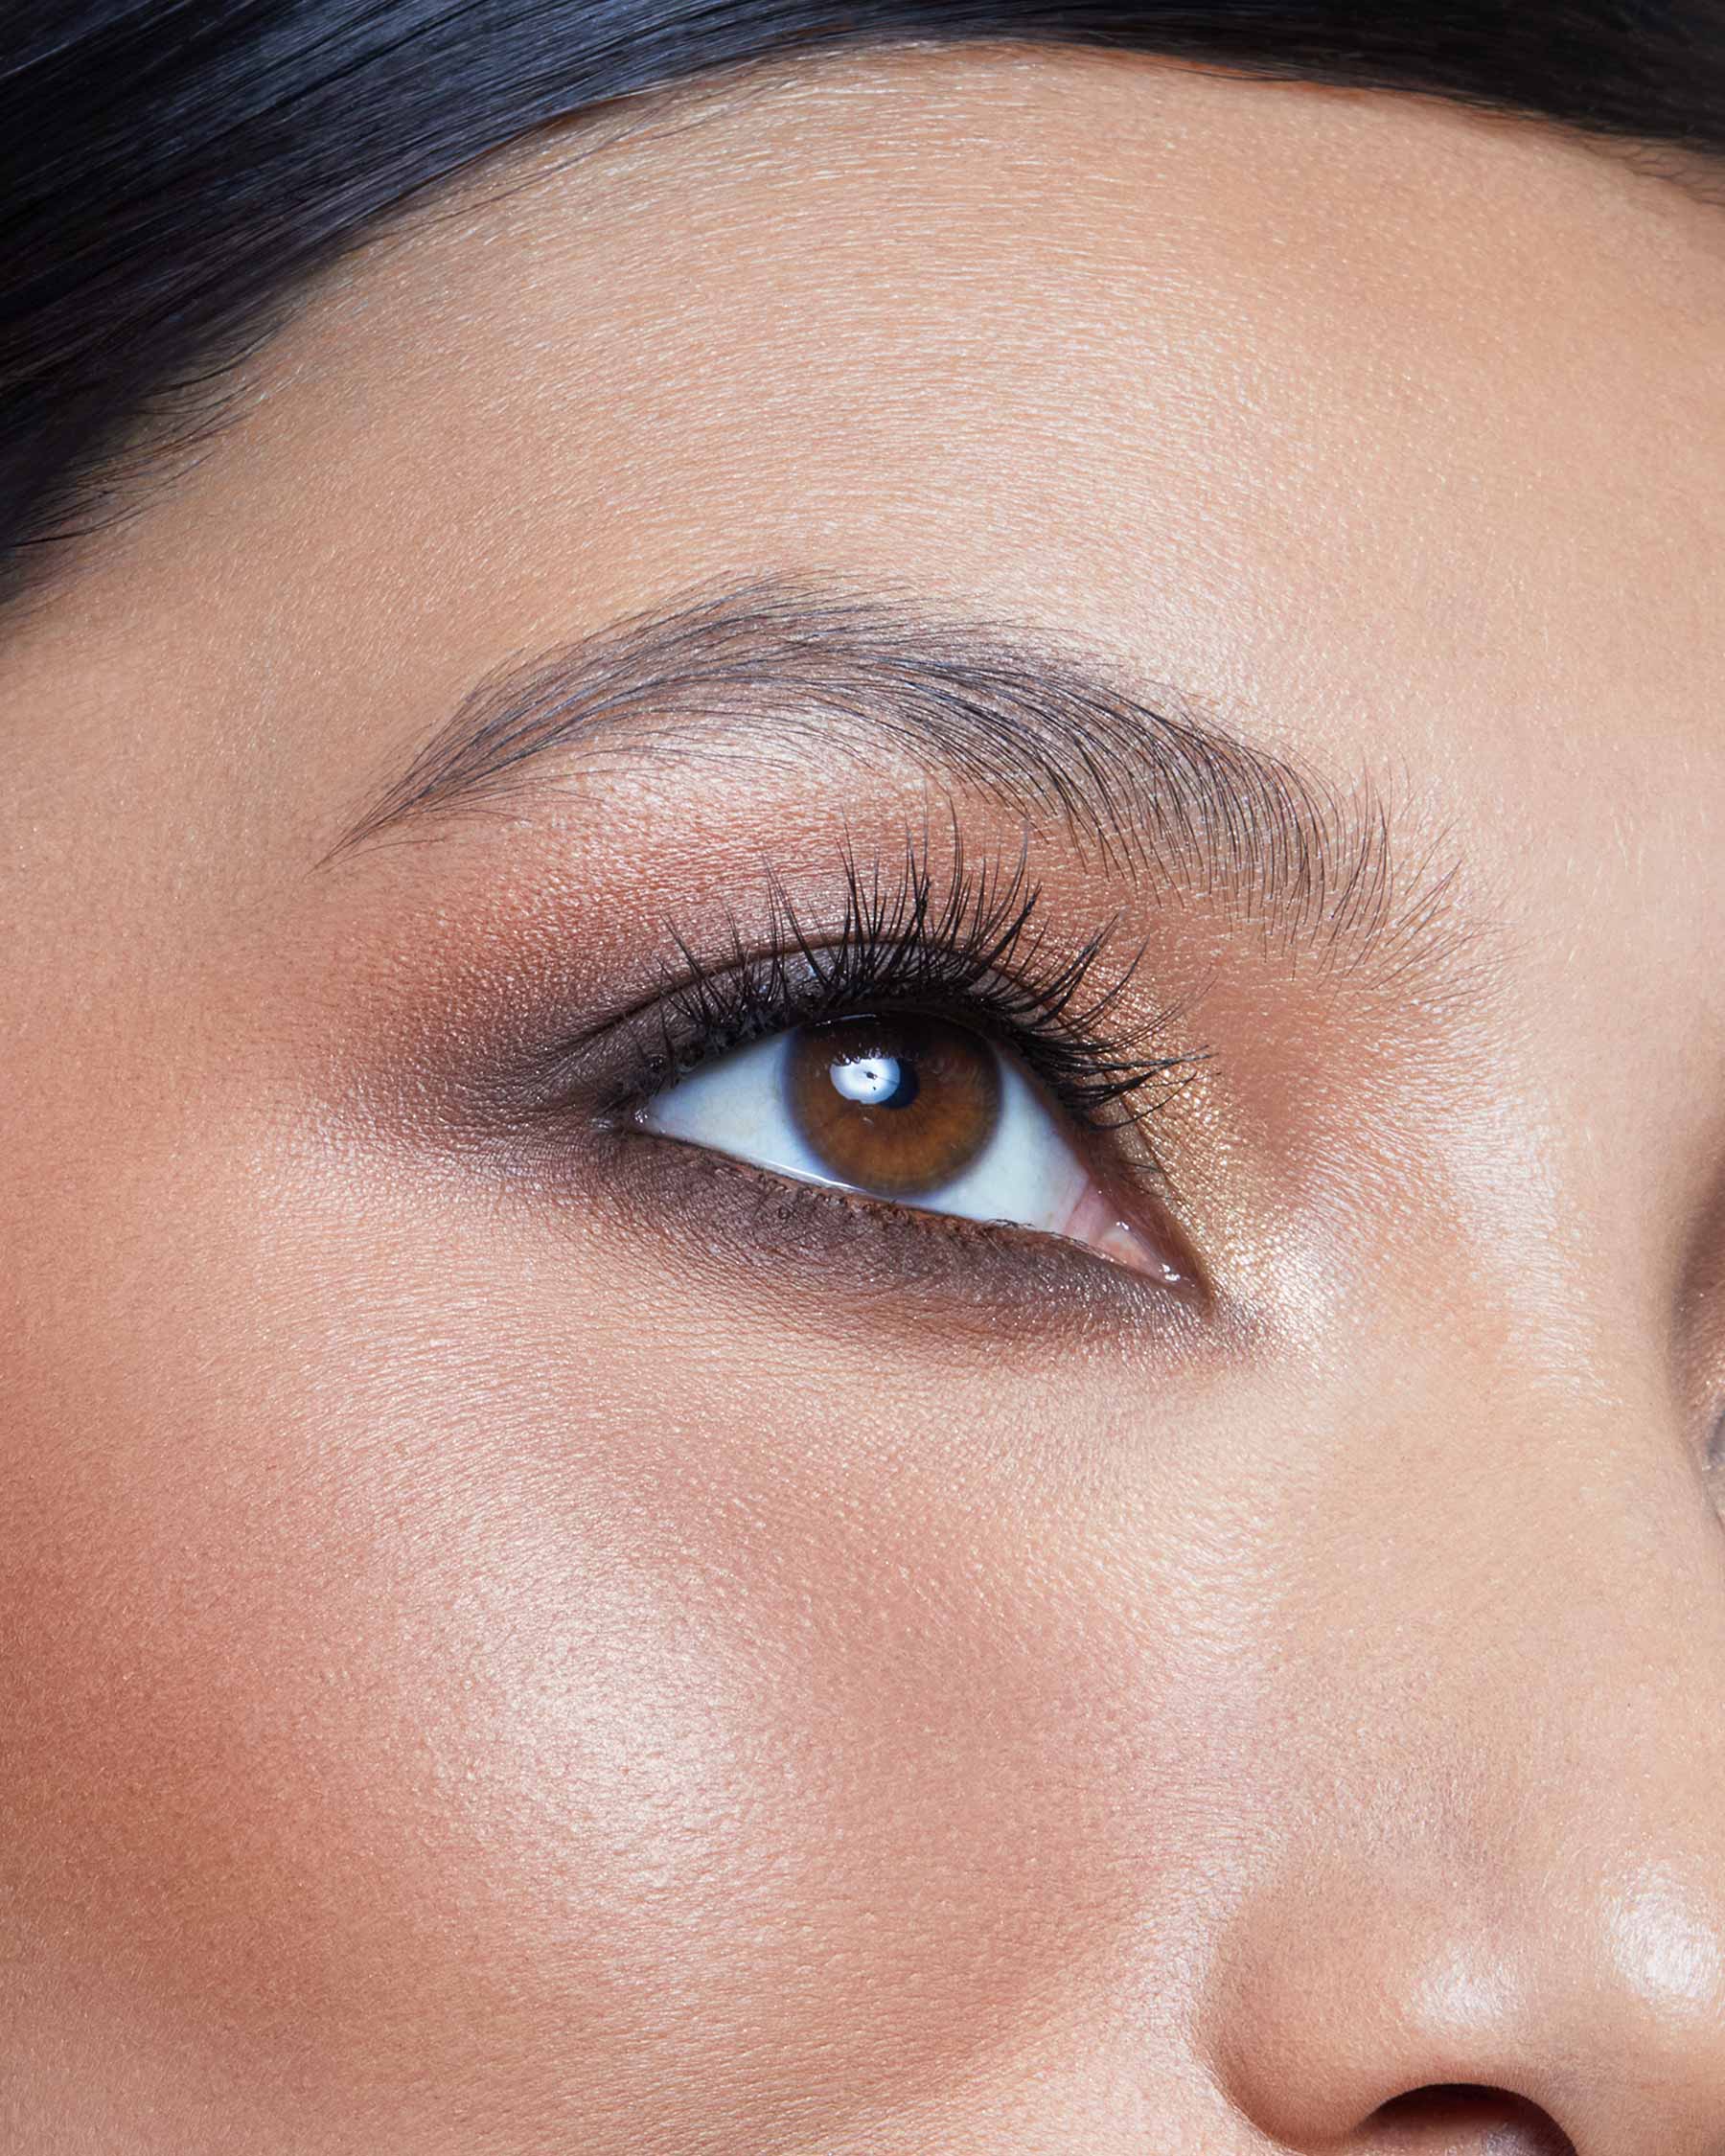 The Best Nude Eyeshadow Palettes for Natural Smokey Eyes, from